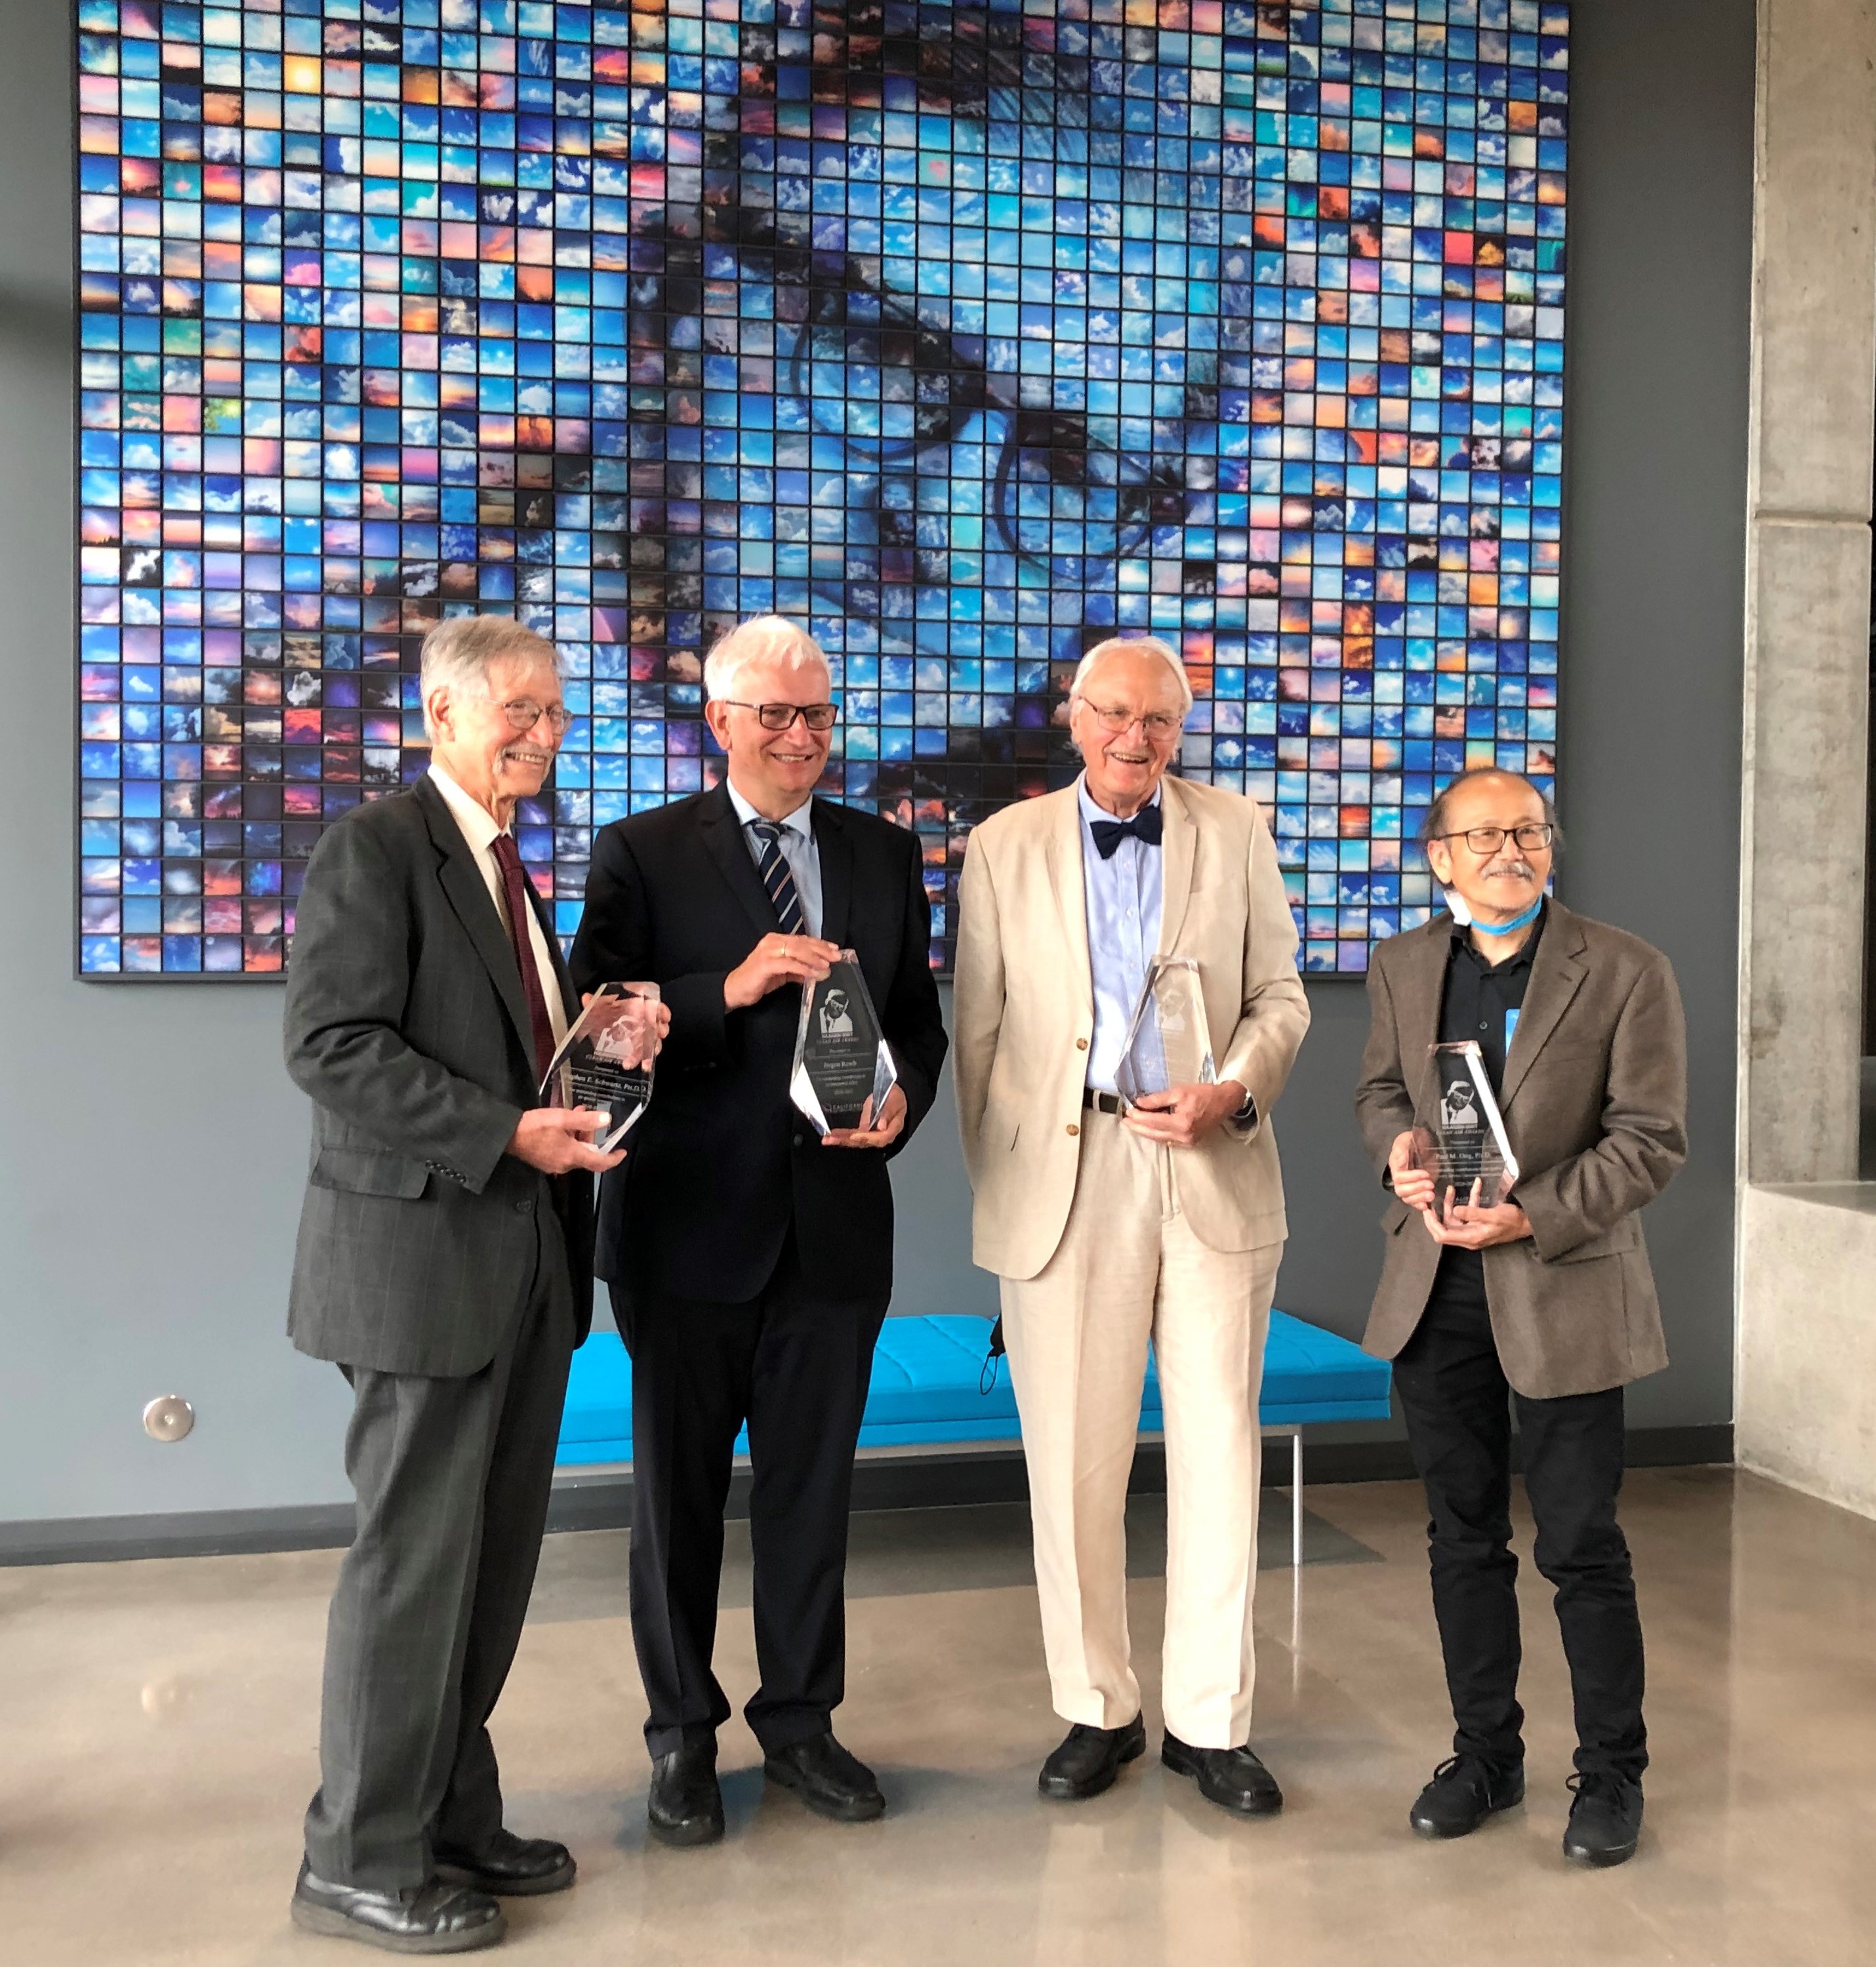 Photo of the 2020-2021 Haagen-Smit Awardees in attendance at Riverside, CA, from left to right: Stephen Schwartz, Juergen Resch, David Kittelson, and Paul Ong